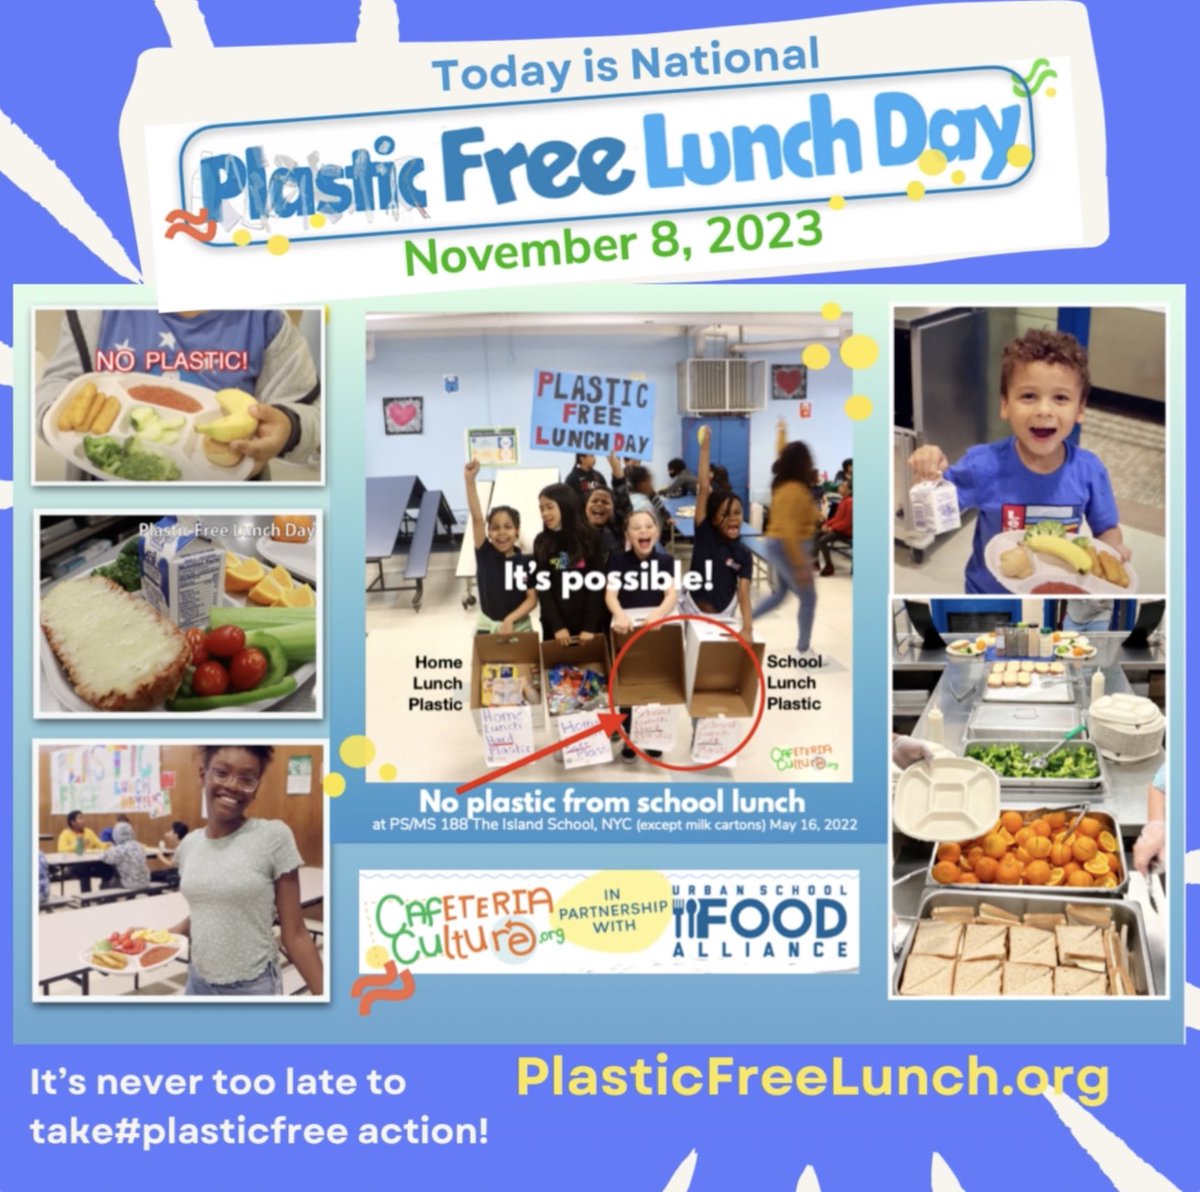 It’s Plastic Free Lunch Day! Students and school nutrition professionals join forces again for the 3rd national Plastic Free Lunch Day, a growing movement to ditch single-use plastics. plasticfreelunch.org It’s never too late to take #plasticfreelunch action!